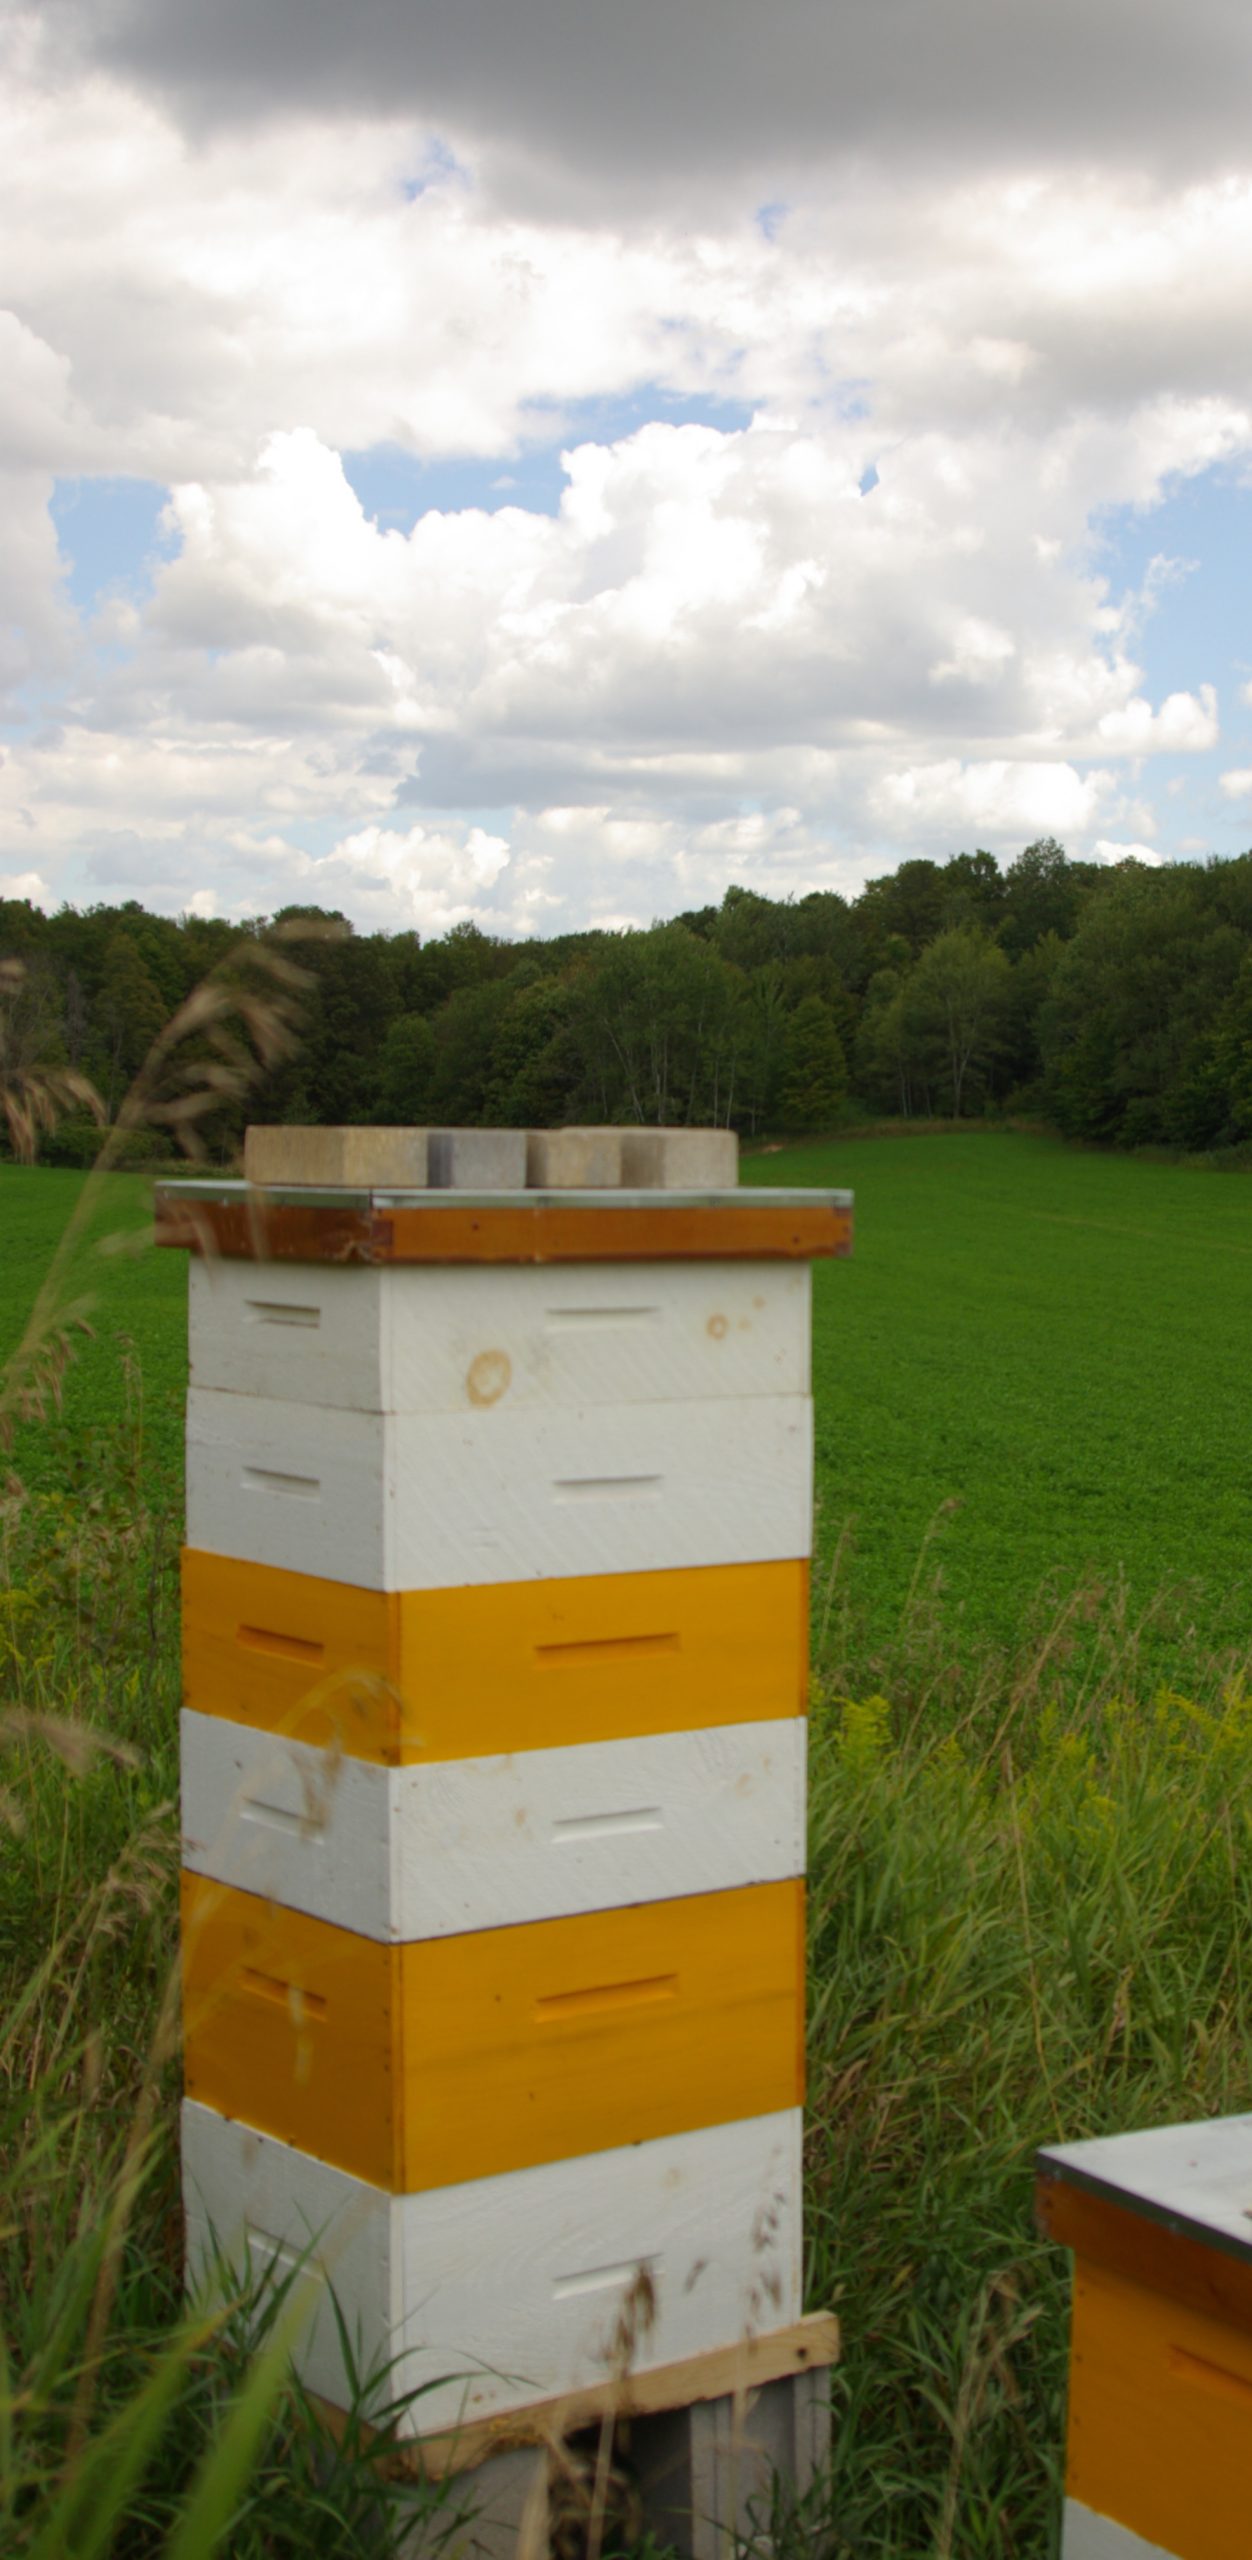 Several bee hive boxes are sitting in an open field under a cloudy sky in the height of summer.